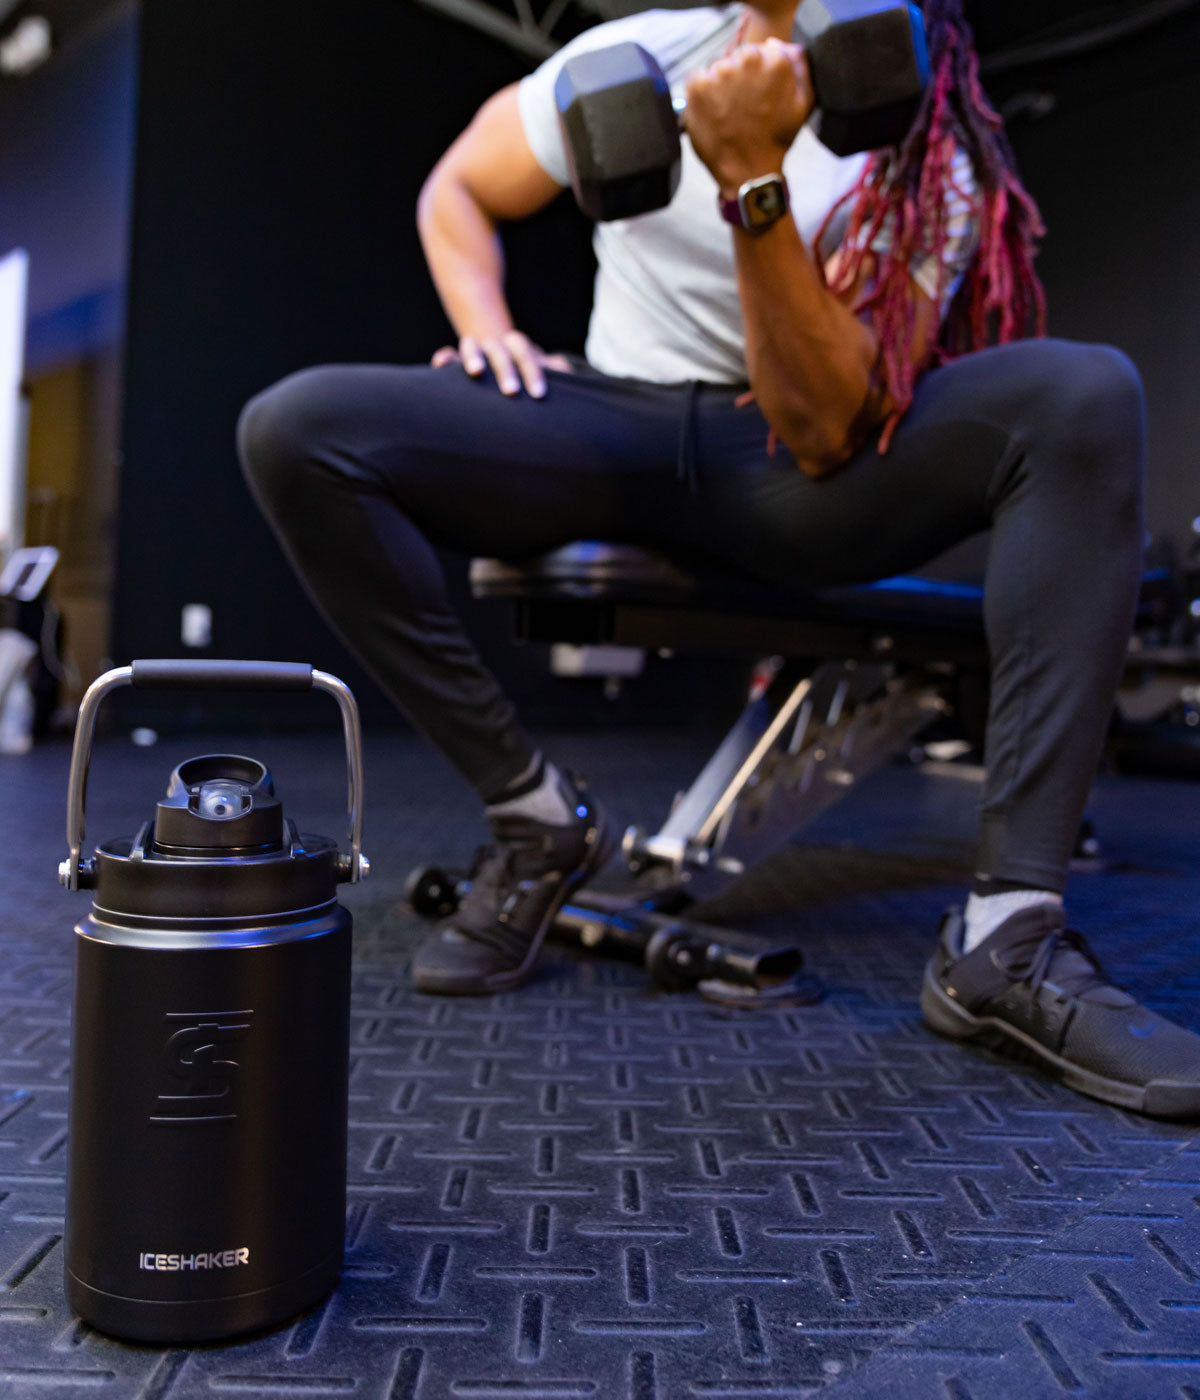 An image of a black-colored Half Gallon Jug sitting on a floor with it's handle up in a gym. In the background, a man is sitting on a workout bench, and lifts a barbell weight with one arm.